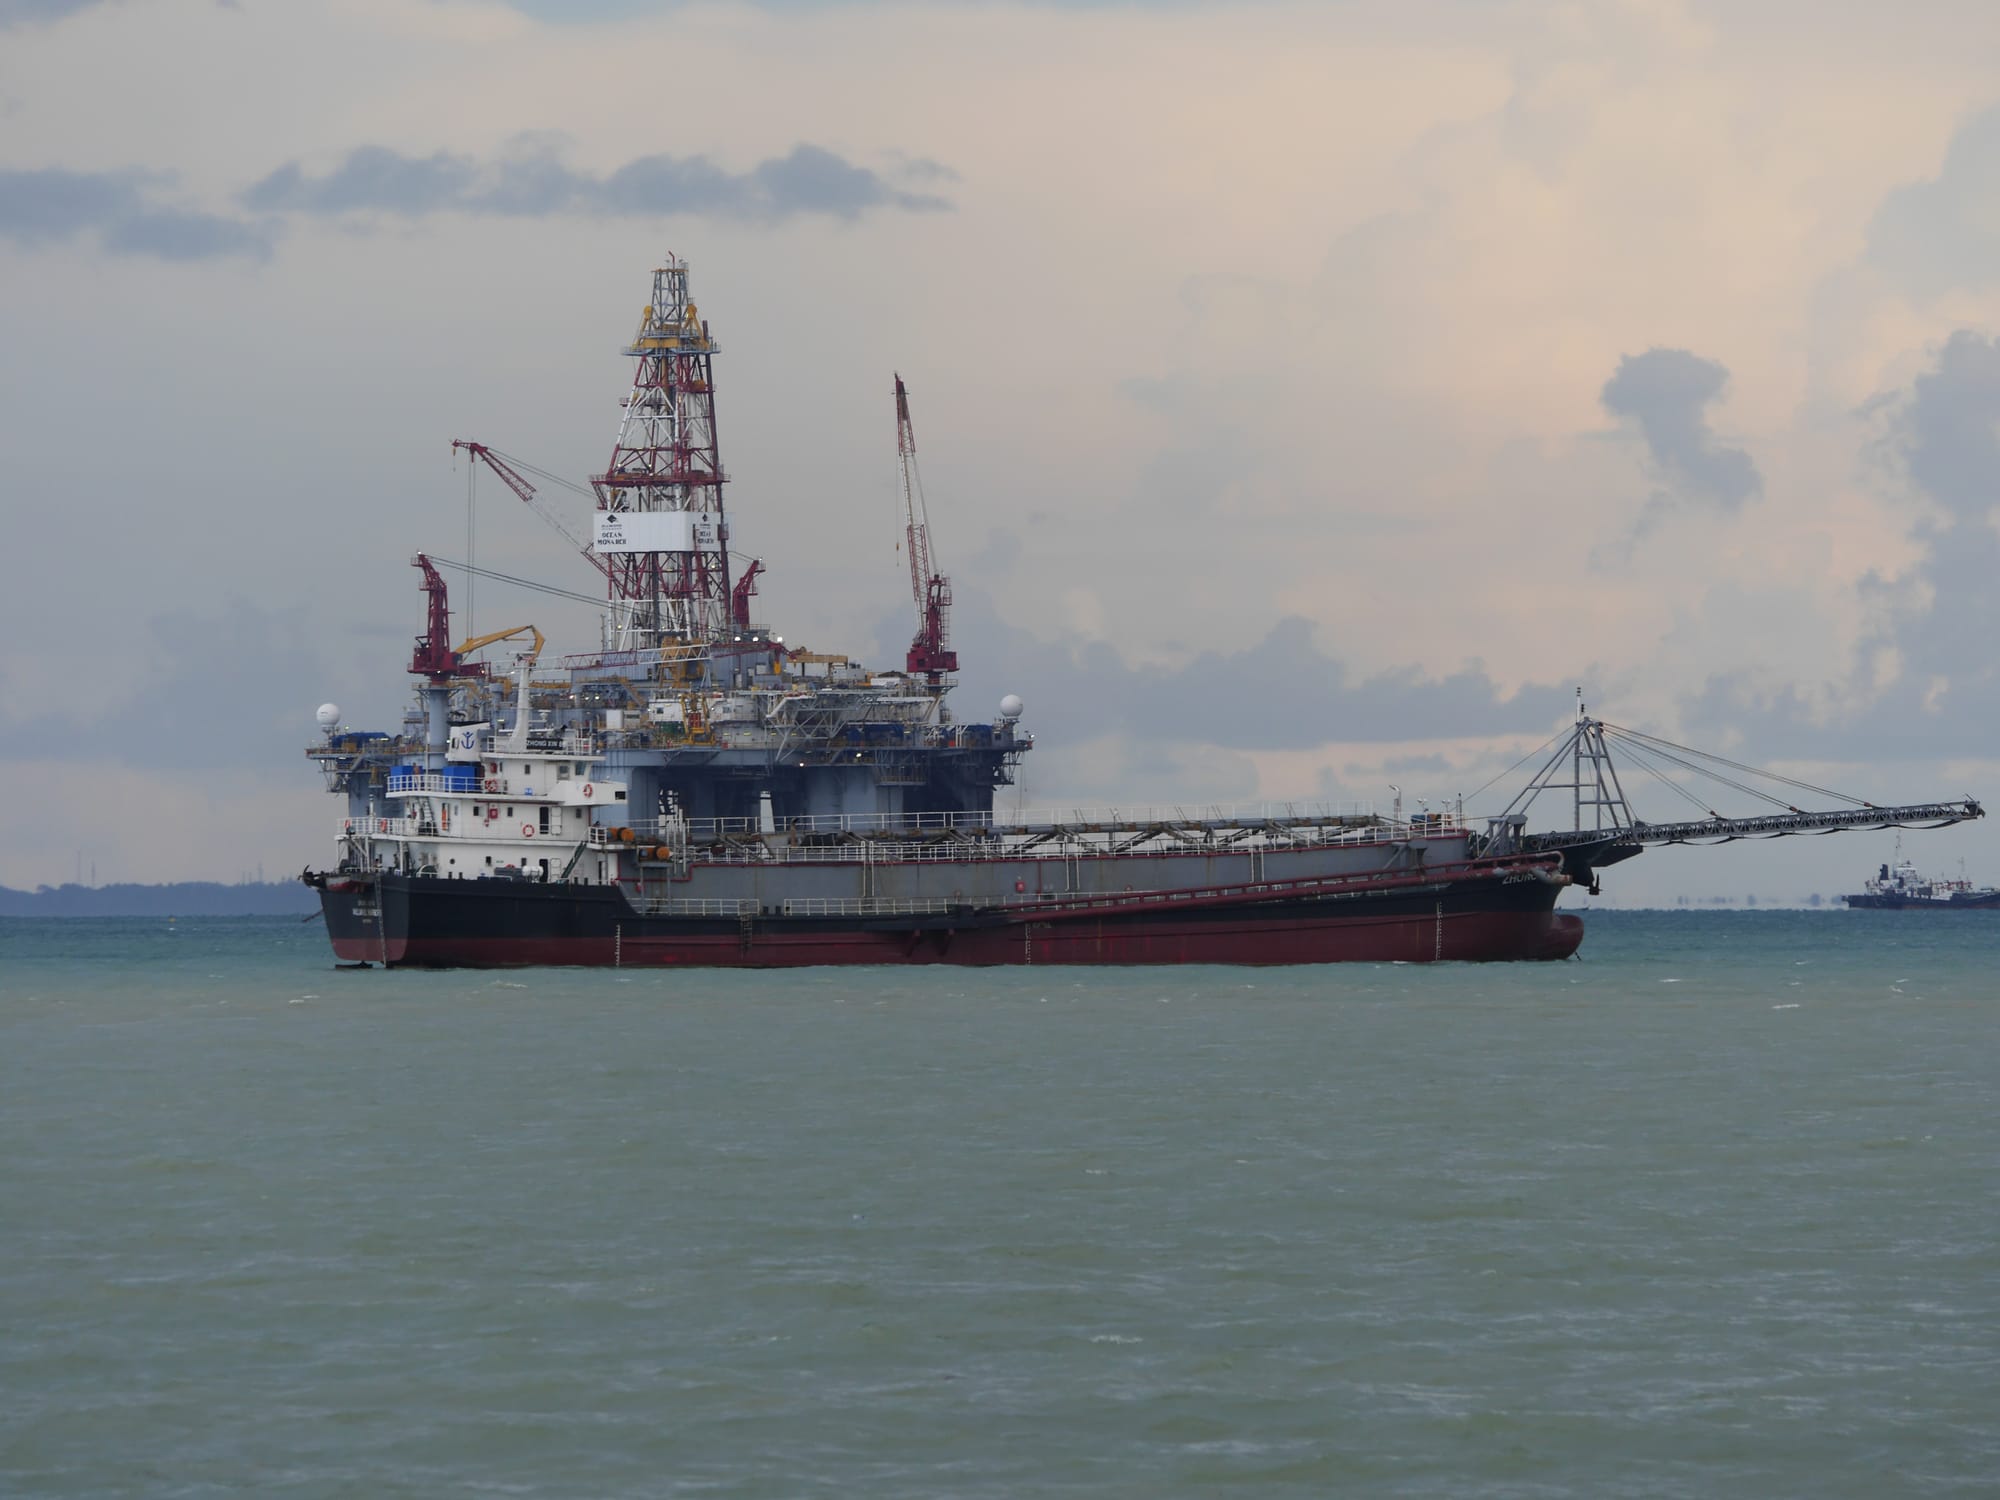 Photo by Author — oil and gas industry — the coast east of Johor Bahru